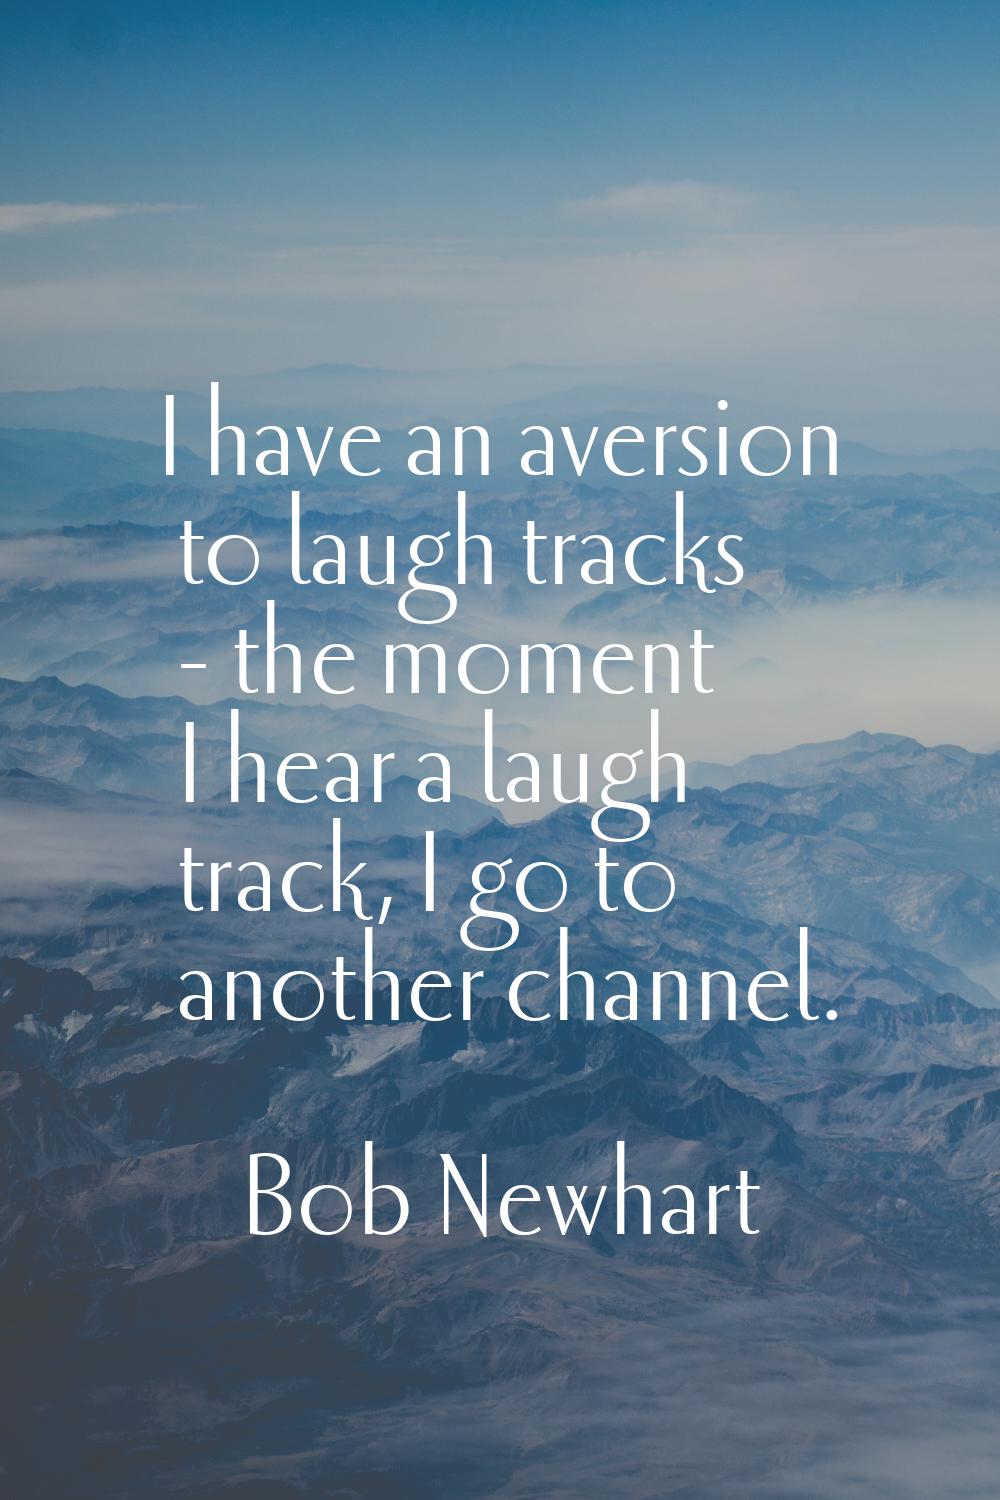 I have an aversion to laugh tracks - the moment I hear a laugh track, I go to another channel.